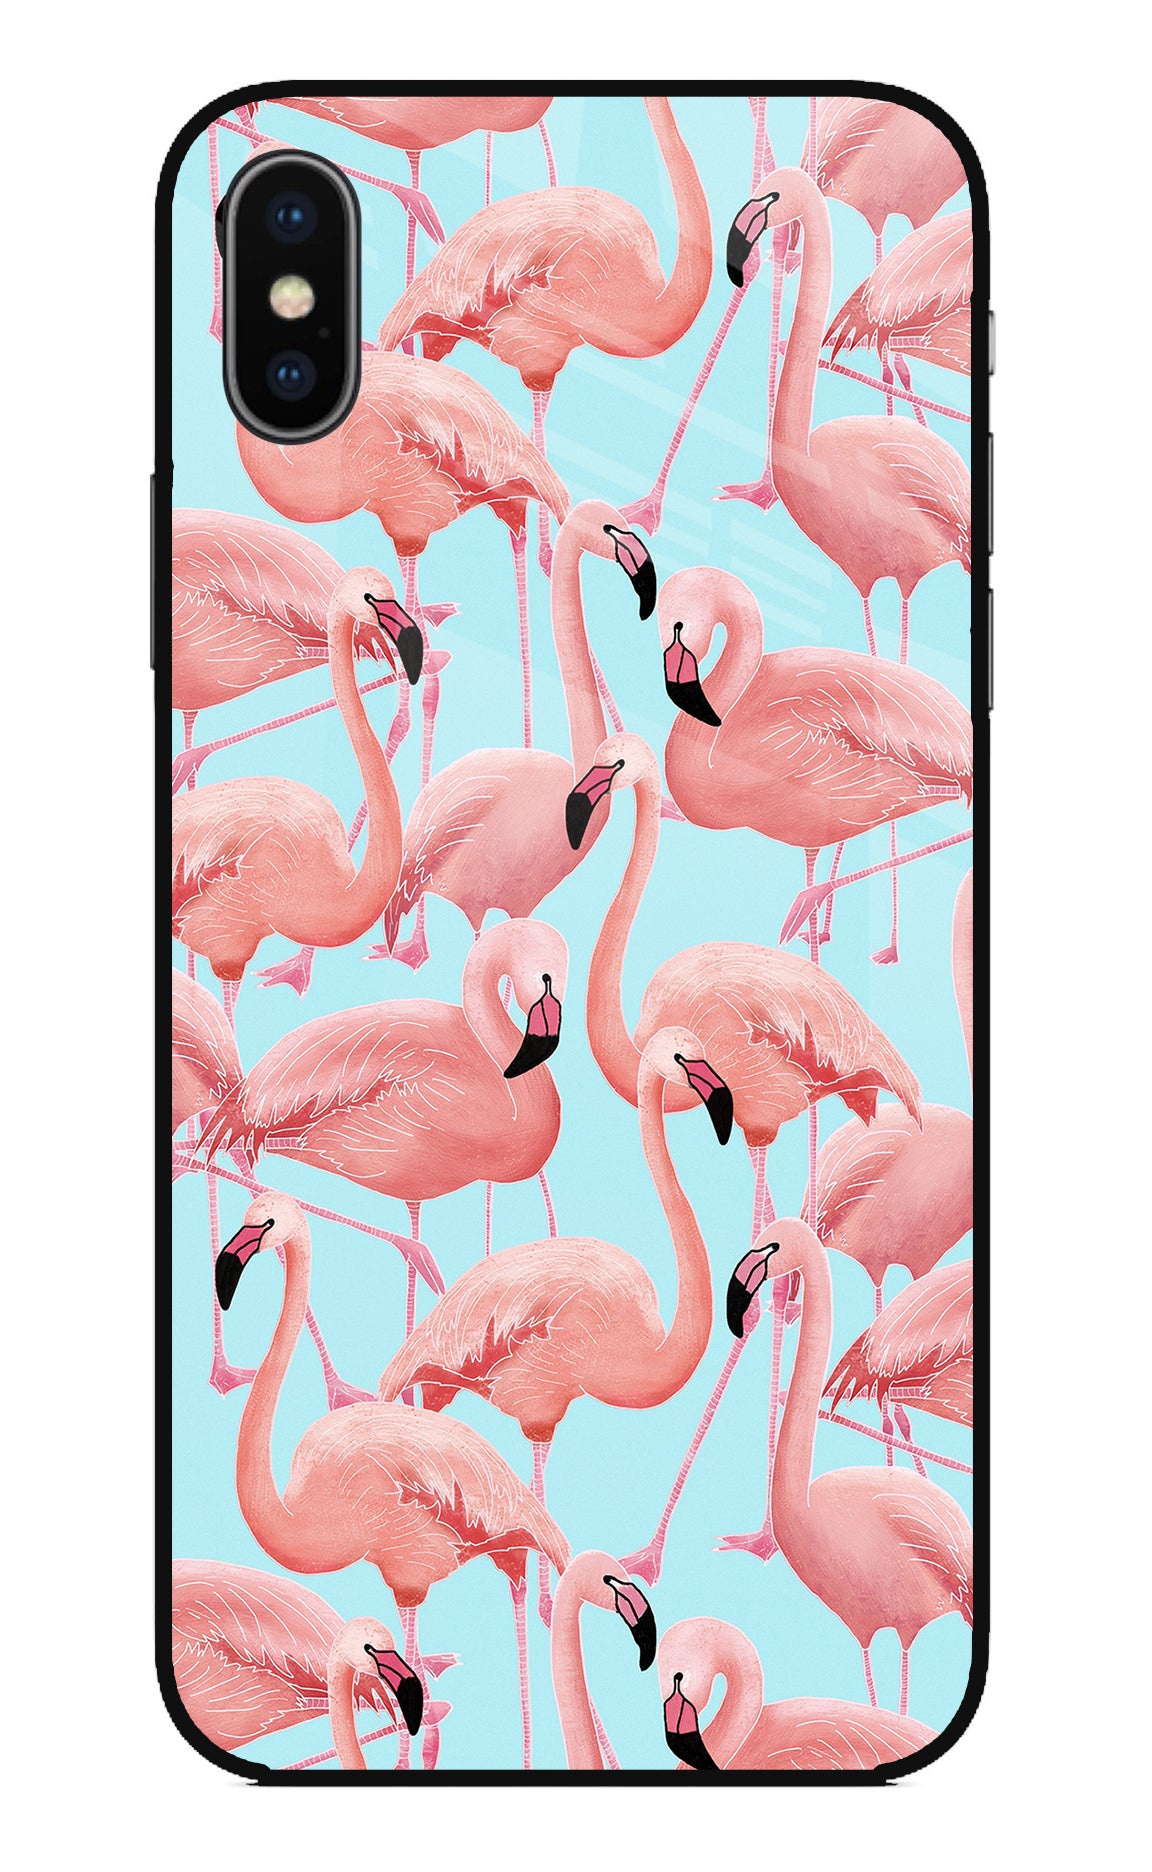 Flamboyance iPhone X Back Cover